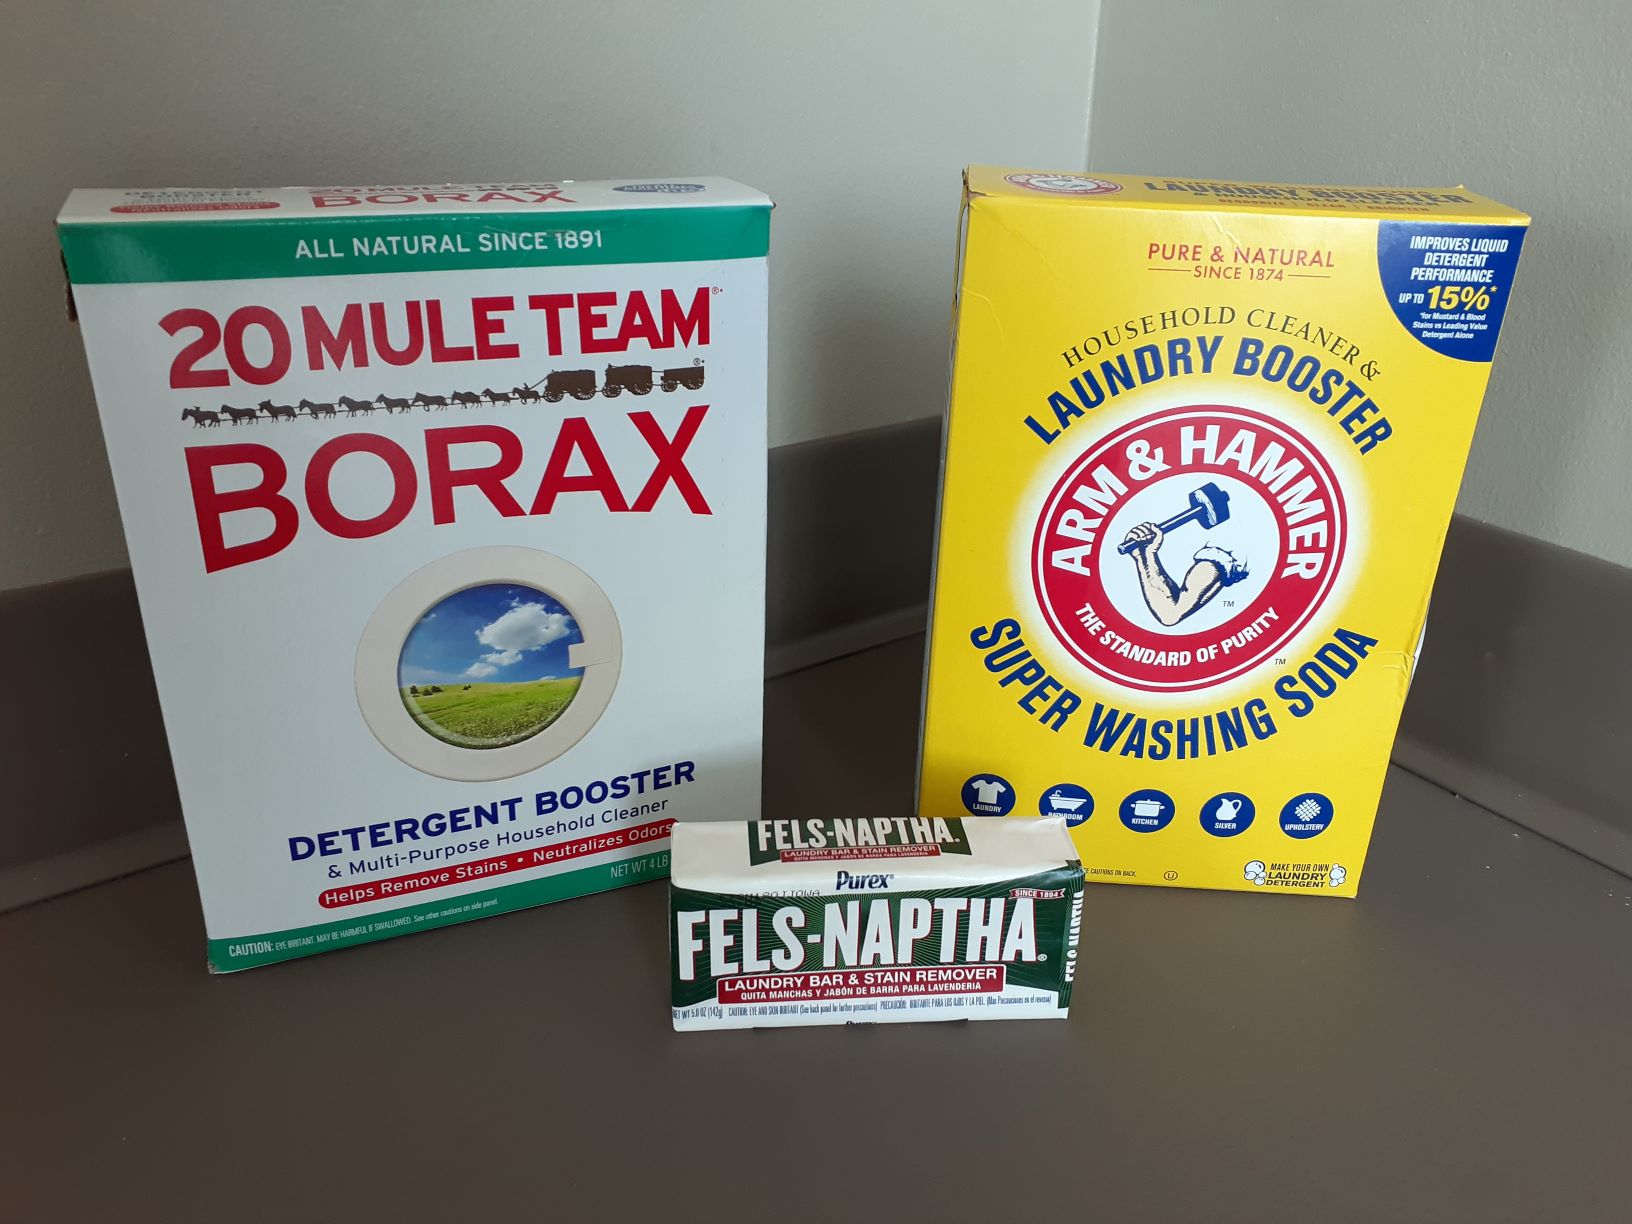 supplies used in laundry detergent - Borax, Super Washing Soda, Fels-Naptha soap